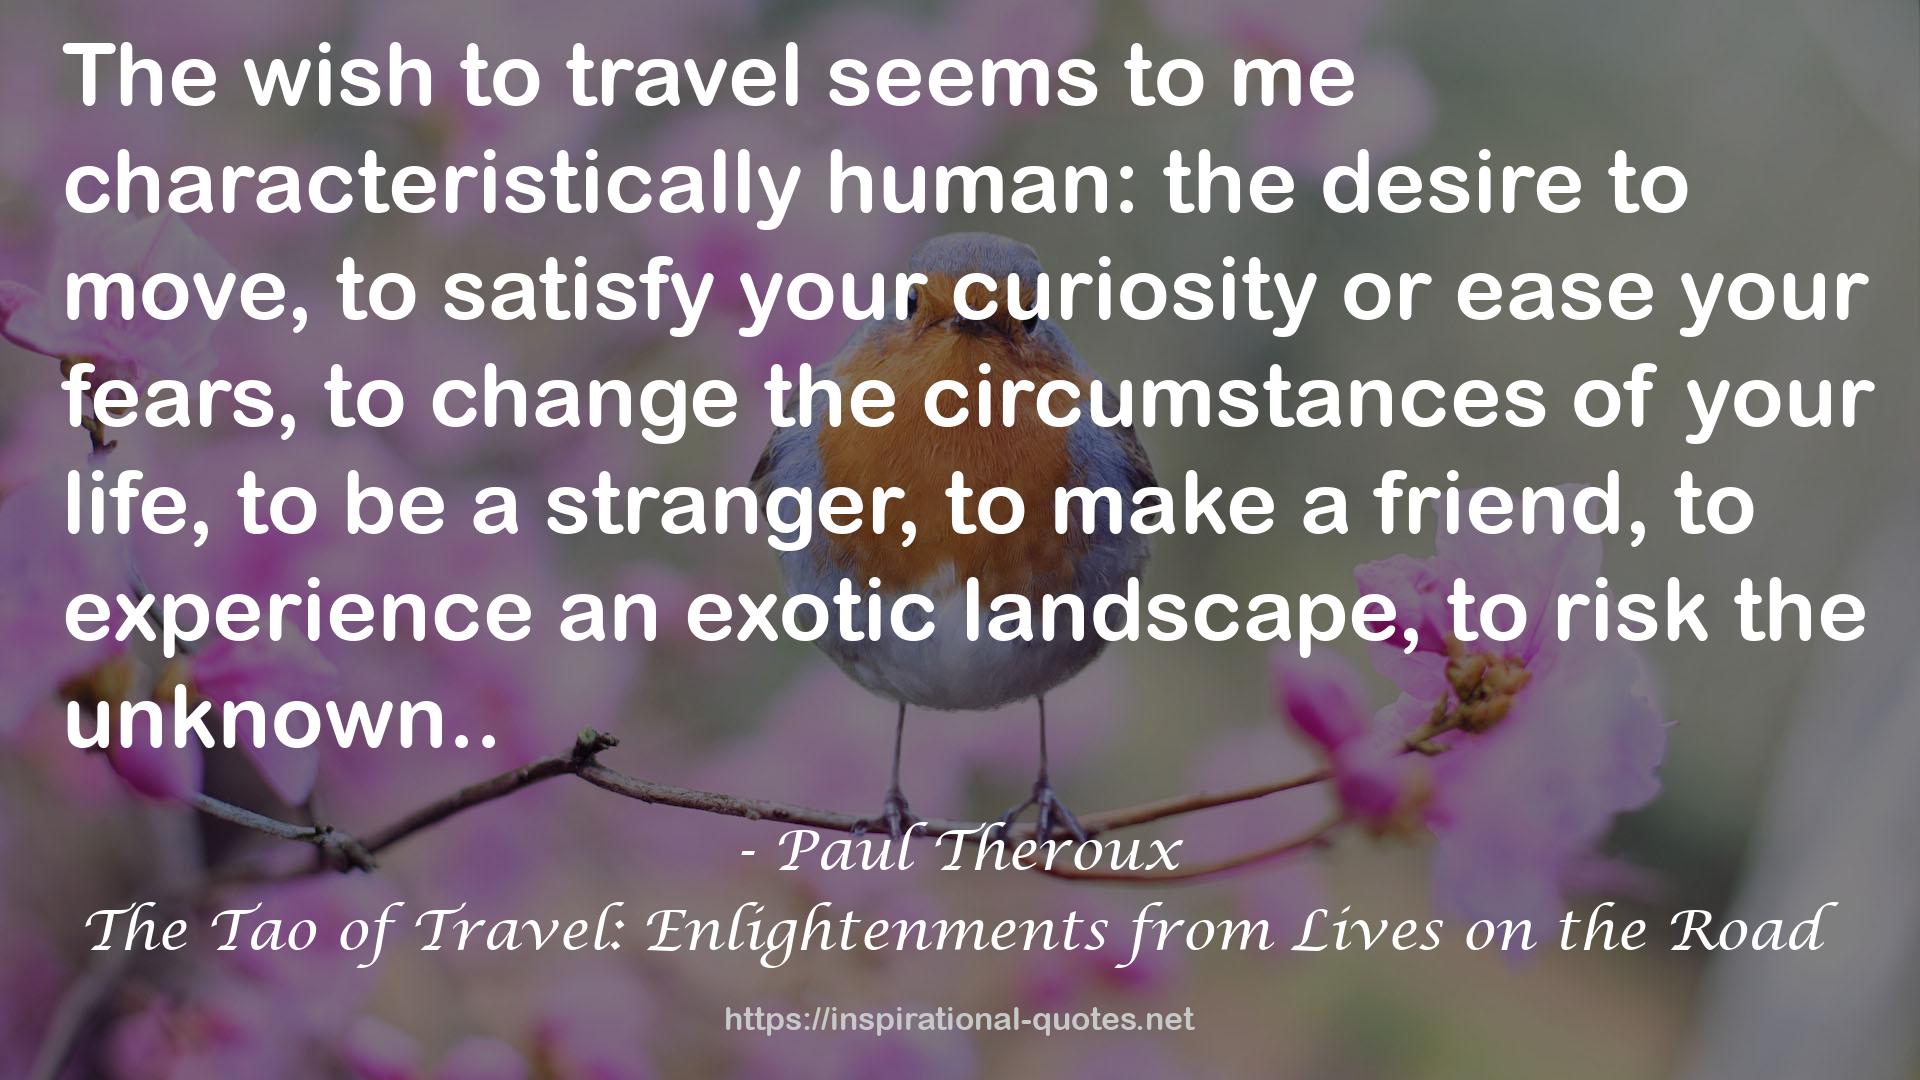 The Tao of Travel: Enlightenments from Lives on the Road QUOTES